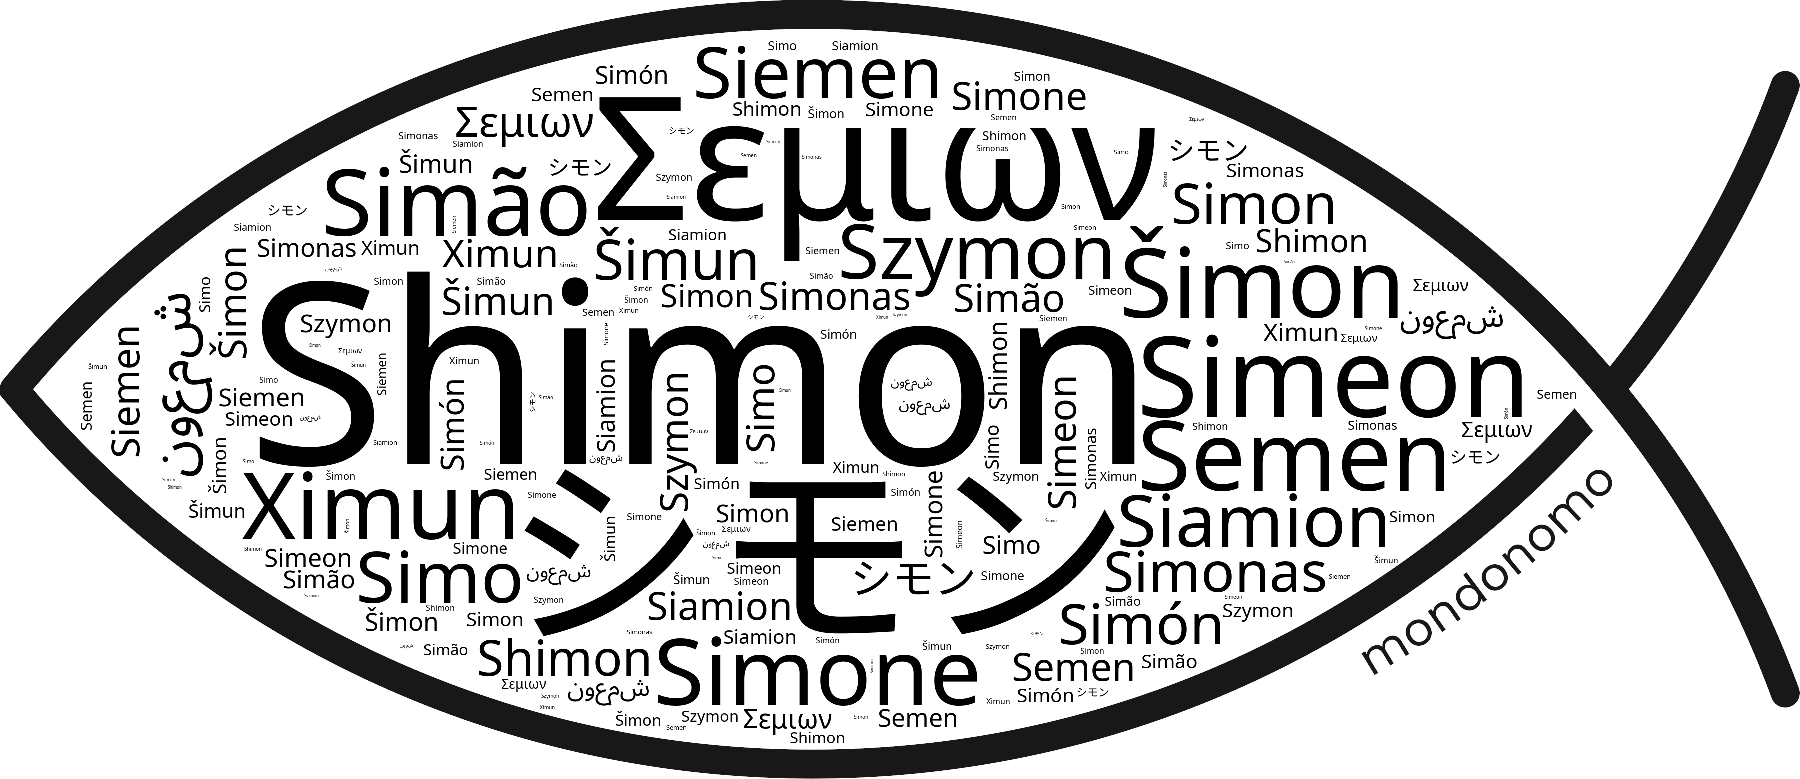 Name Shimon in the world's Bibles